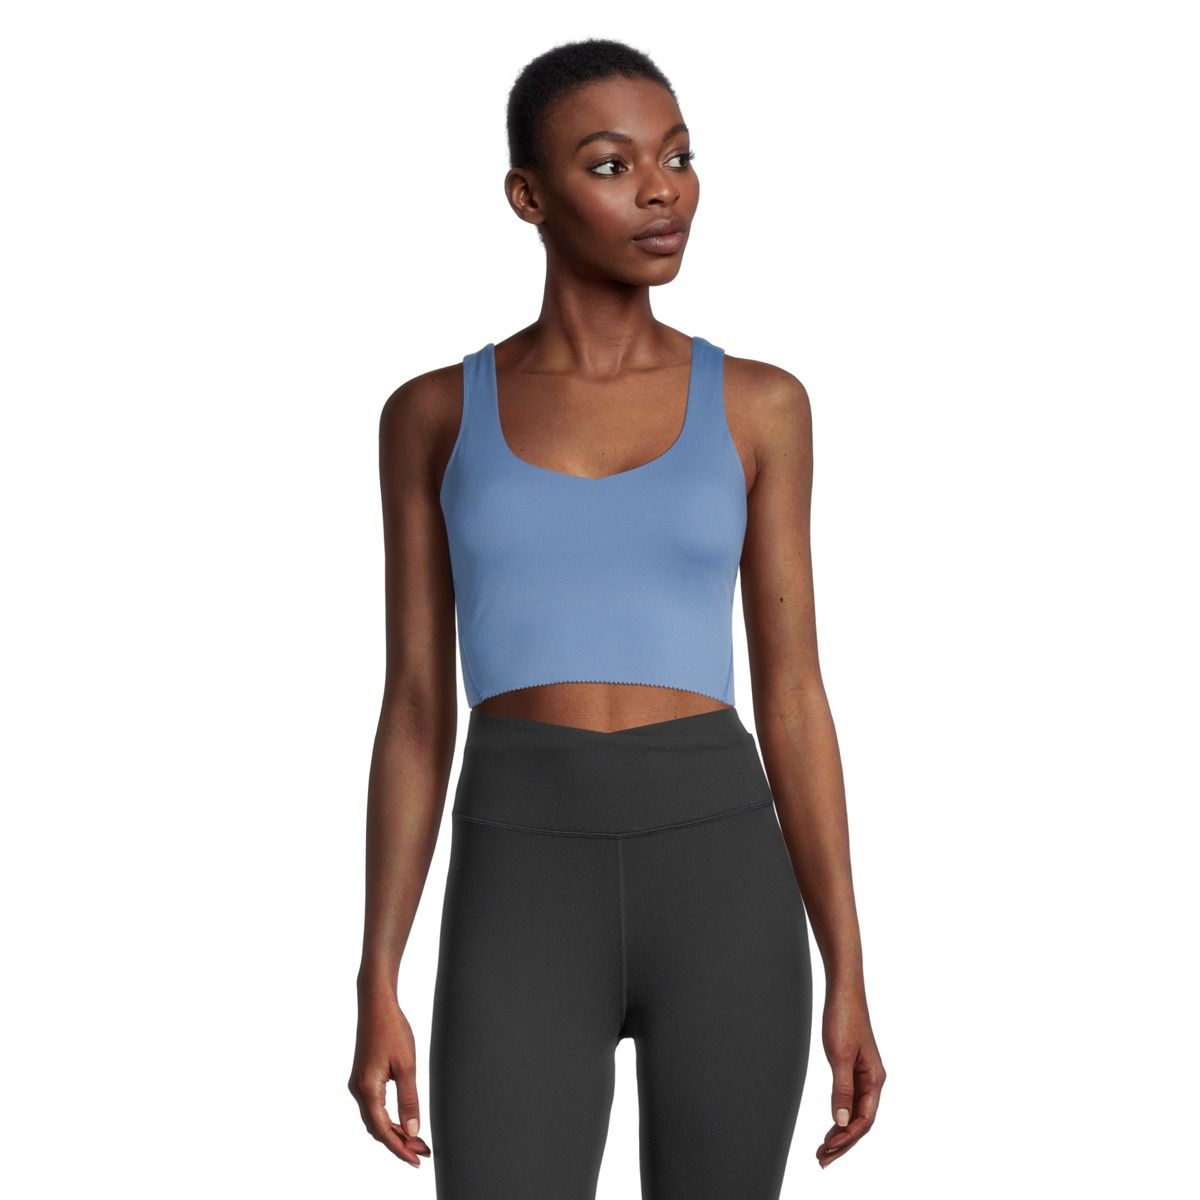 https://media-www.sportchek.ca/product/div-03-softgoods/dpt-70-athletic-clothing/sdpt-02-womens/333811697/skechers-w-gosculpt-scalloped-long-bra-2734bbd1-74d8-4cce-ad3e-2a81c59a7426-jpgrendition.jpg?imdensity=1&imwidth=1244&impolicy=mZoom